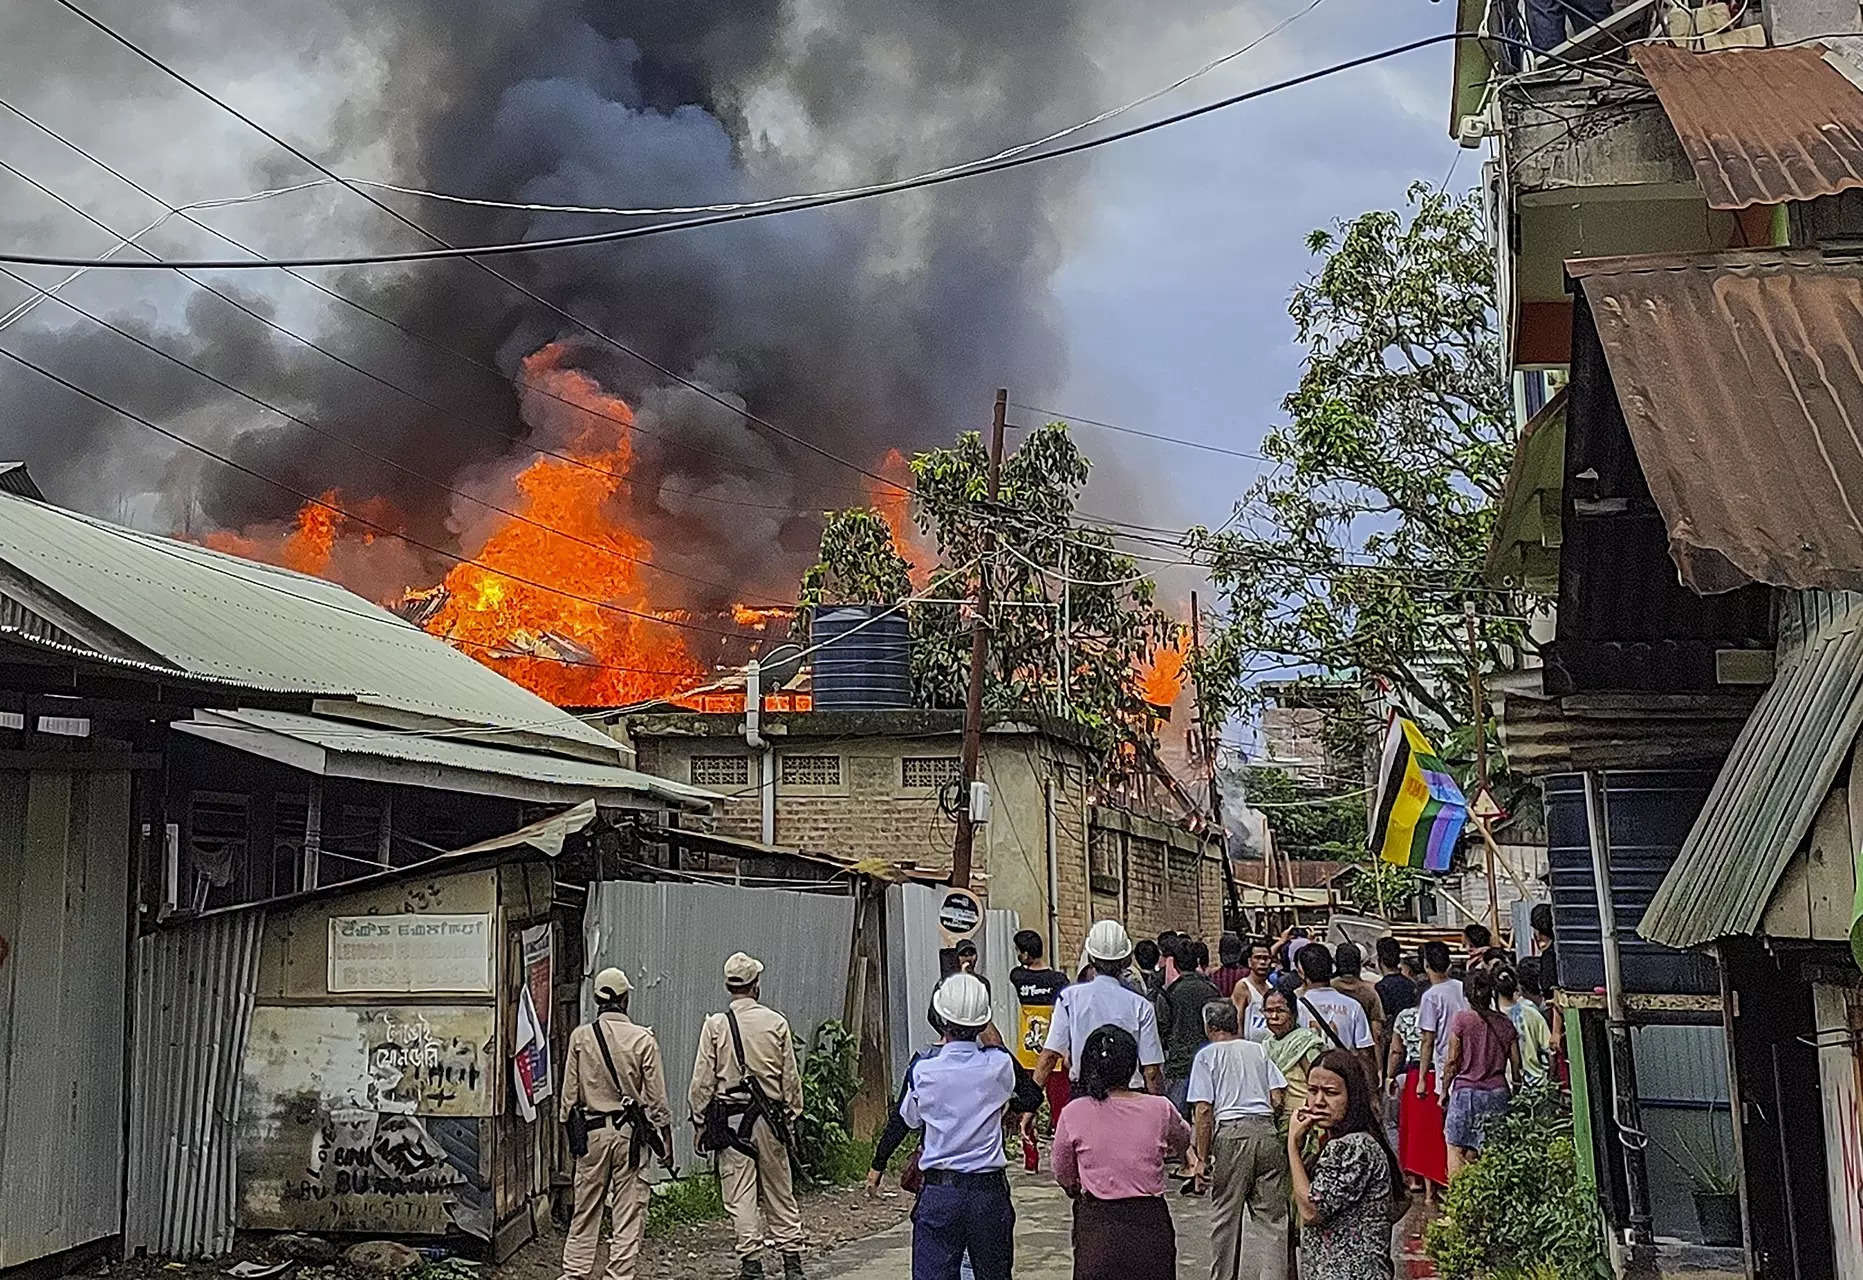 Manipur Violence Today: Security forces clash with mob in Imphal, houses  set on fire | India News - Times of India